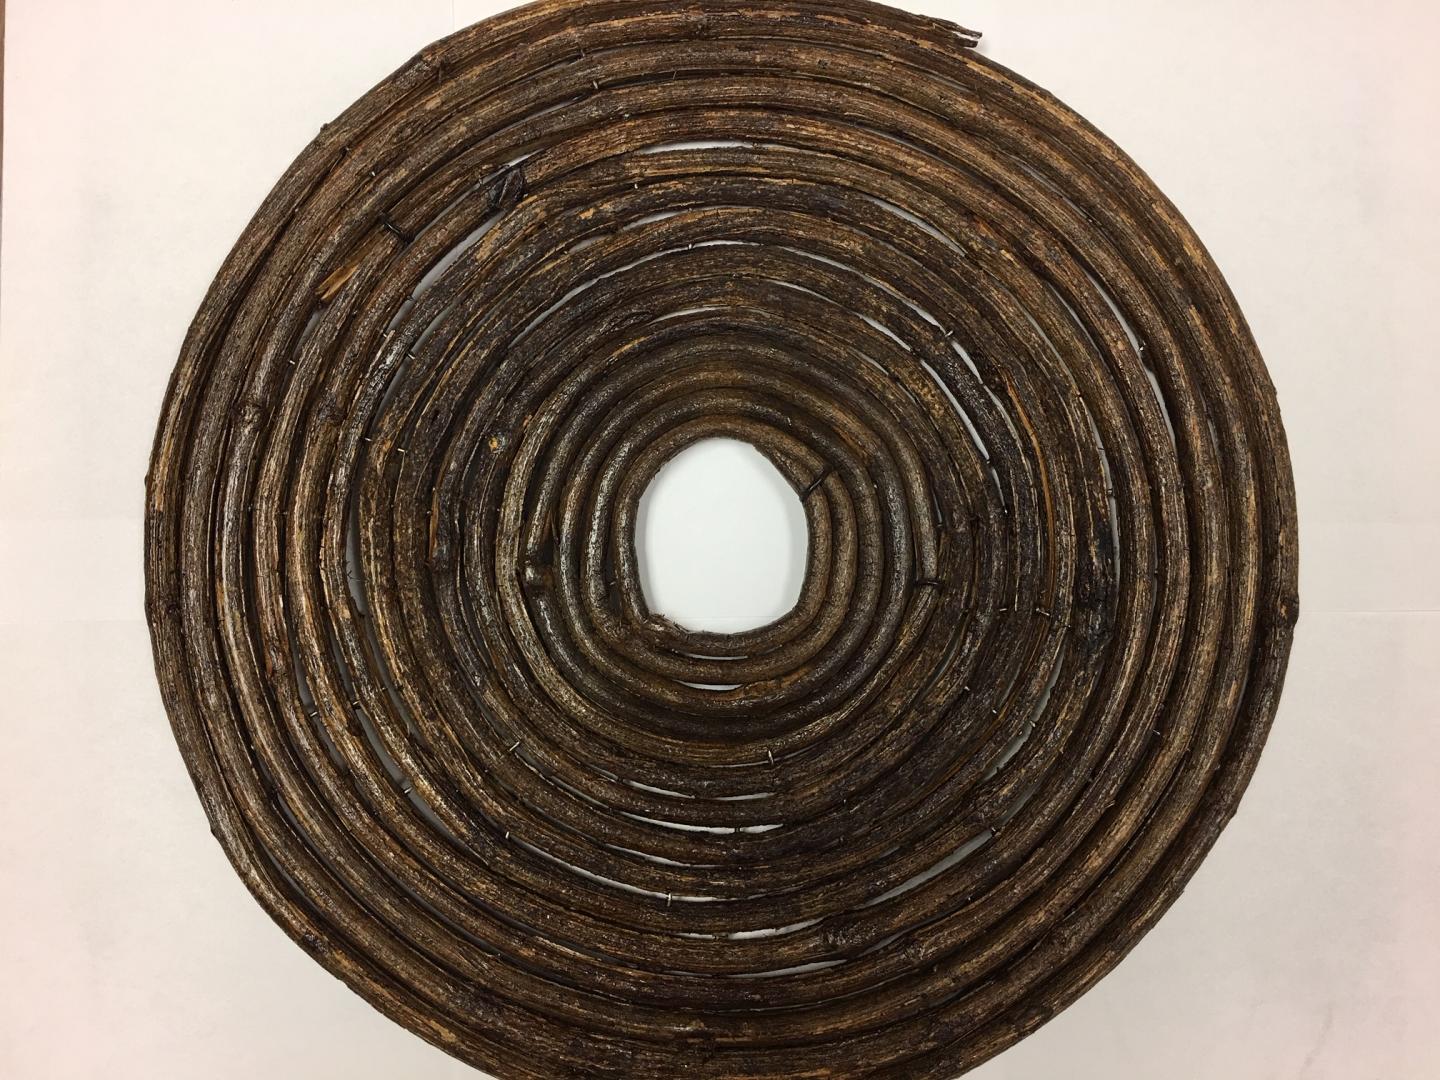 Natural Tree Charger Plate 13 inch $ 3.75